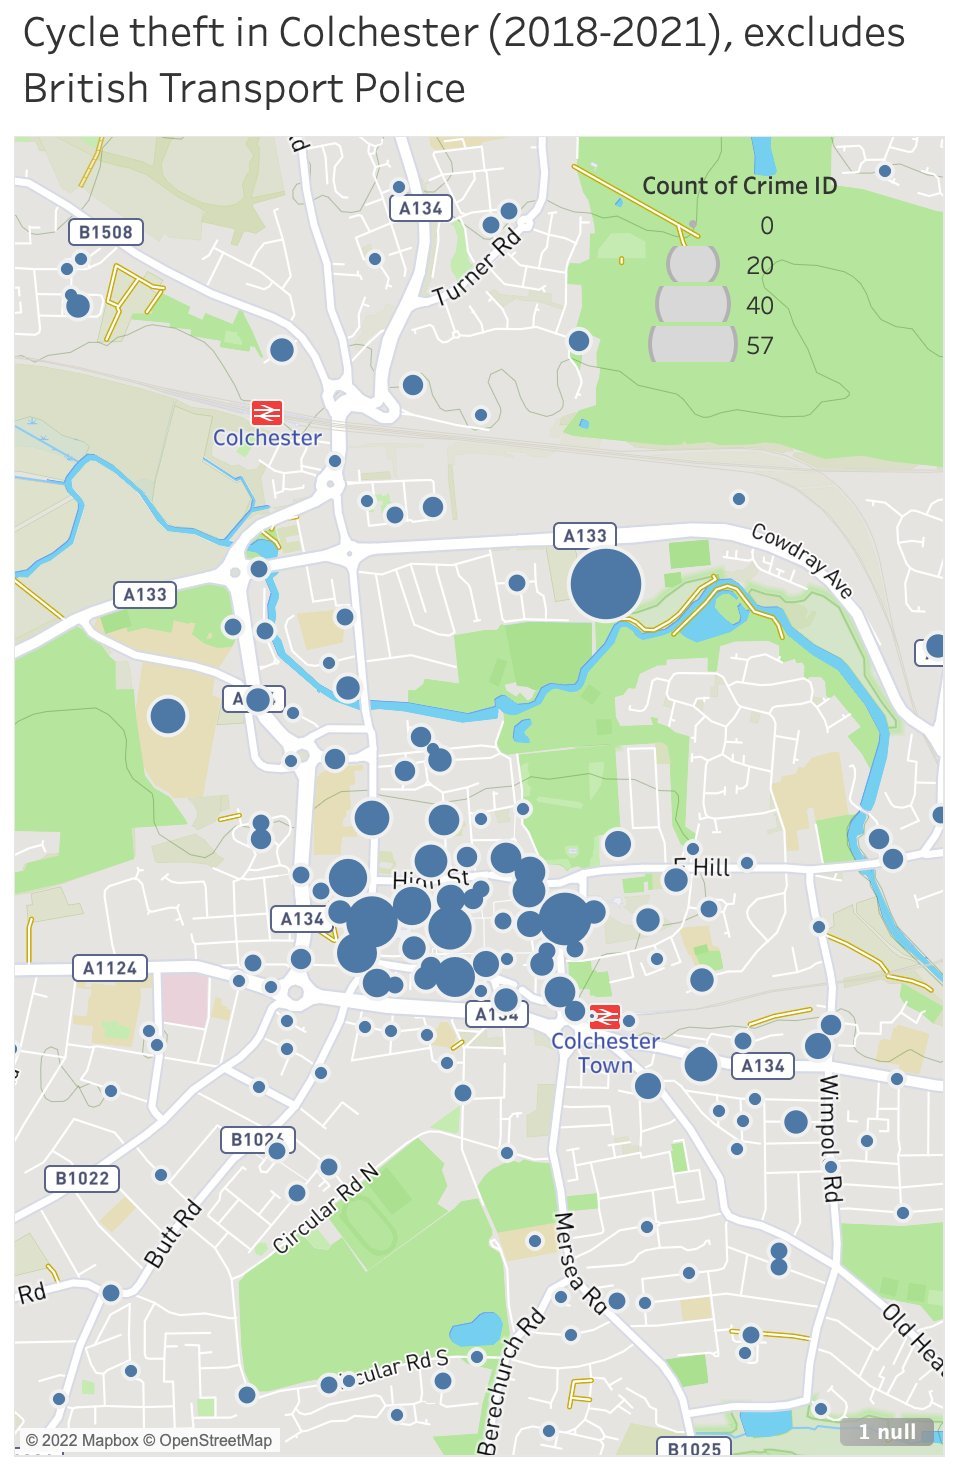 Theft - this infographic shows the prevalence of bike theft in each area of Colchester